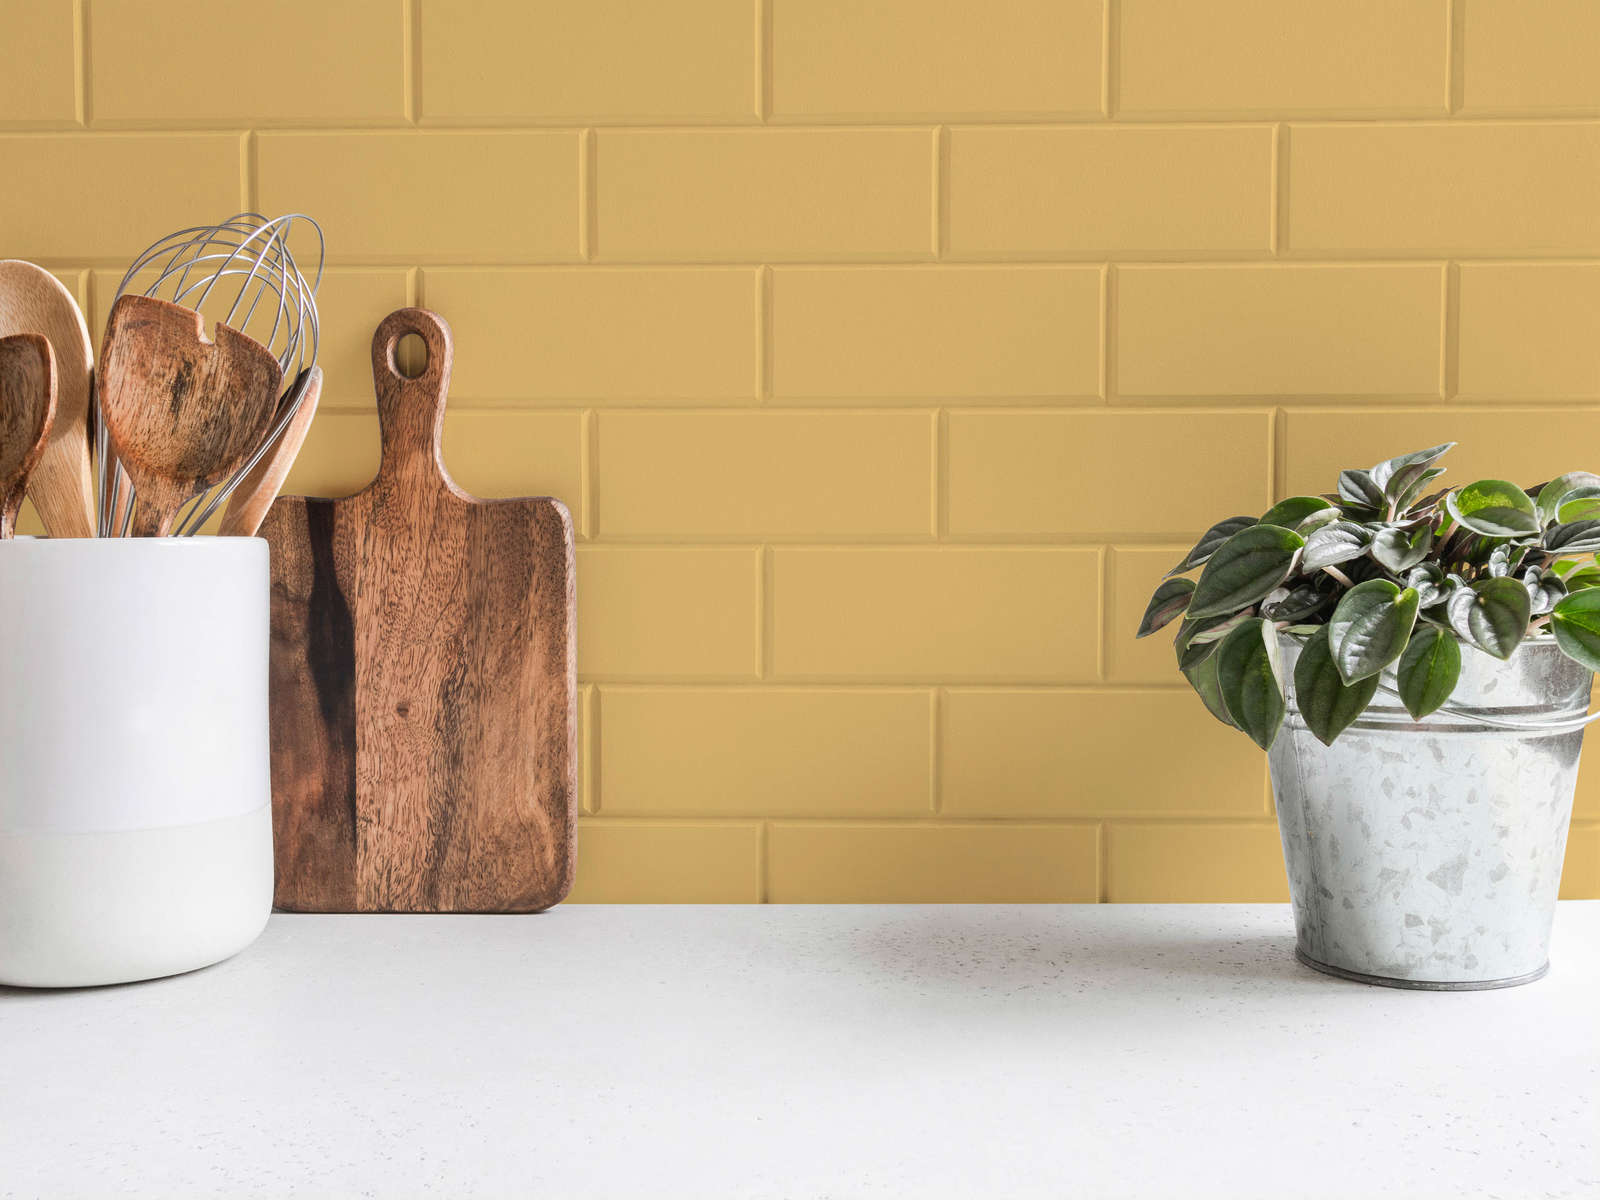             Wall Paint TCK5005 »Playful Pineapple« in friendly yellow – 5.0 litre
        